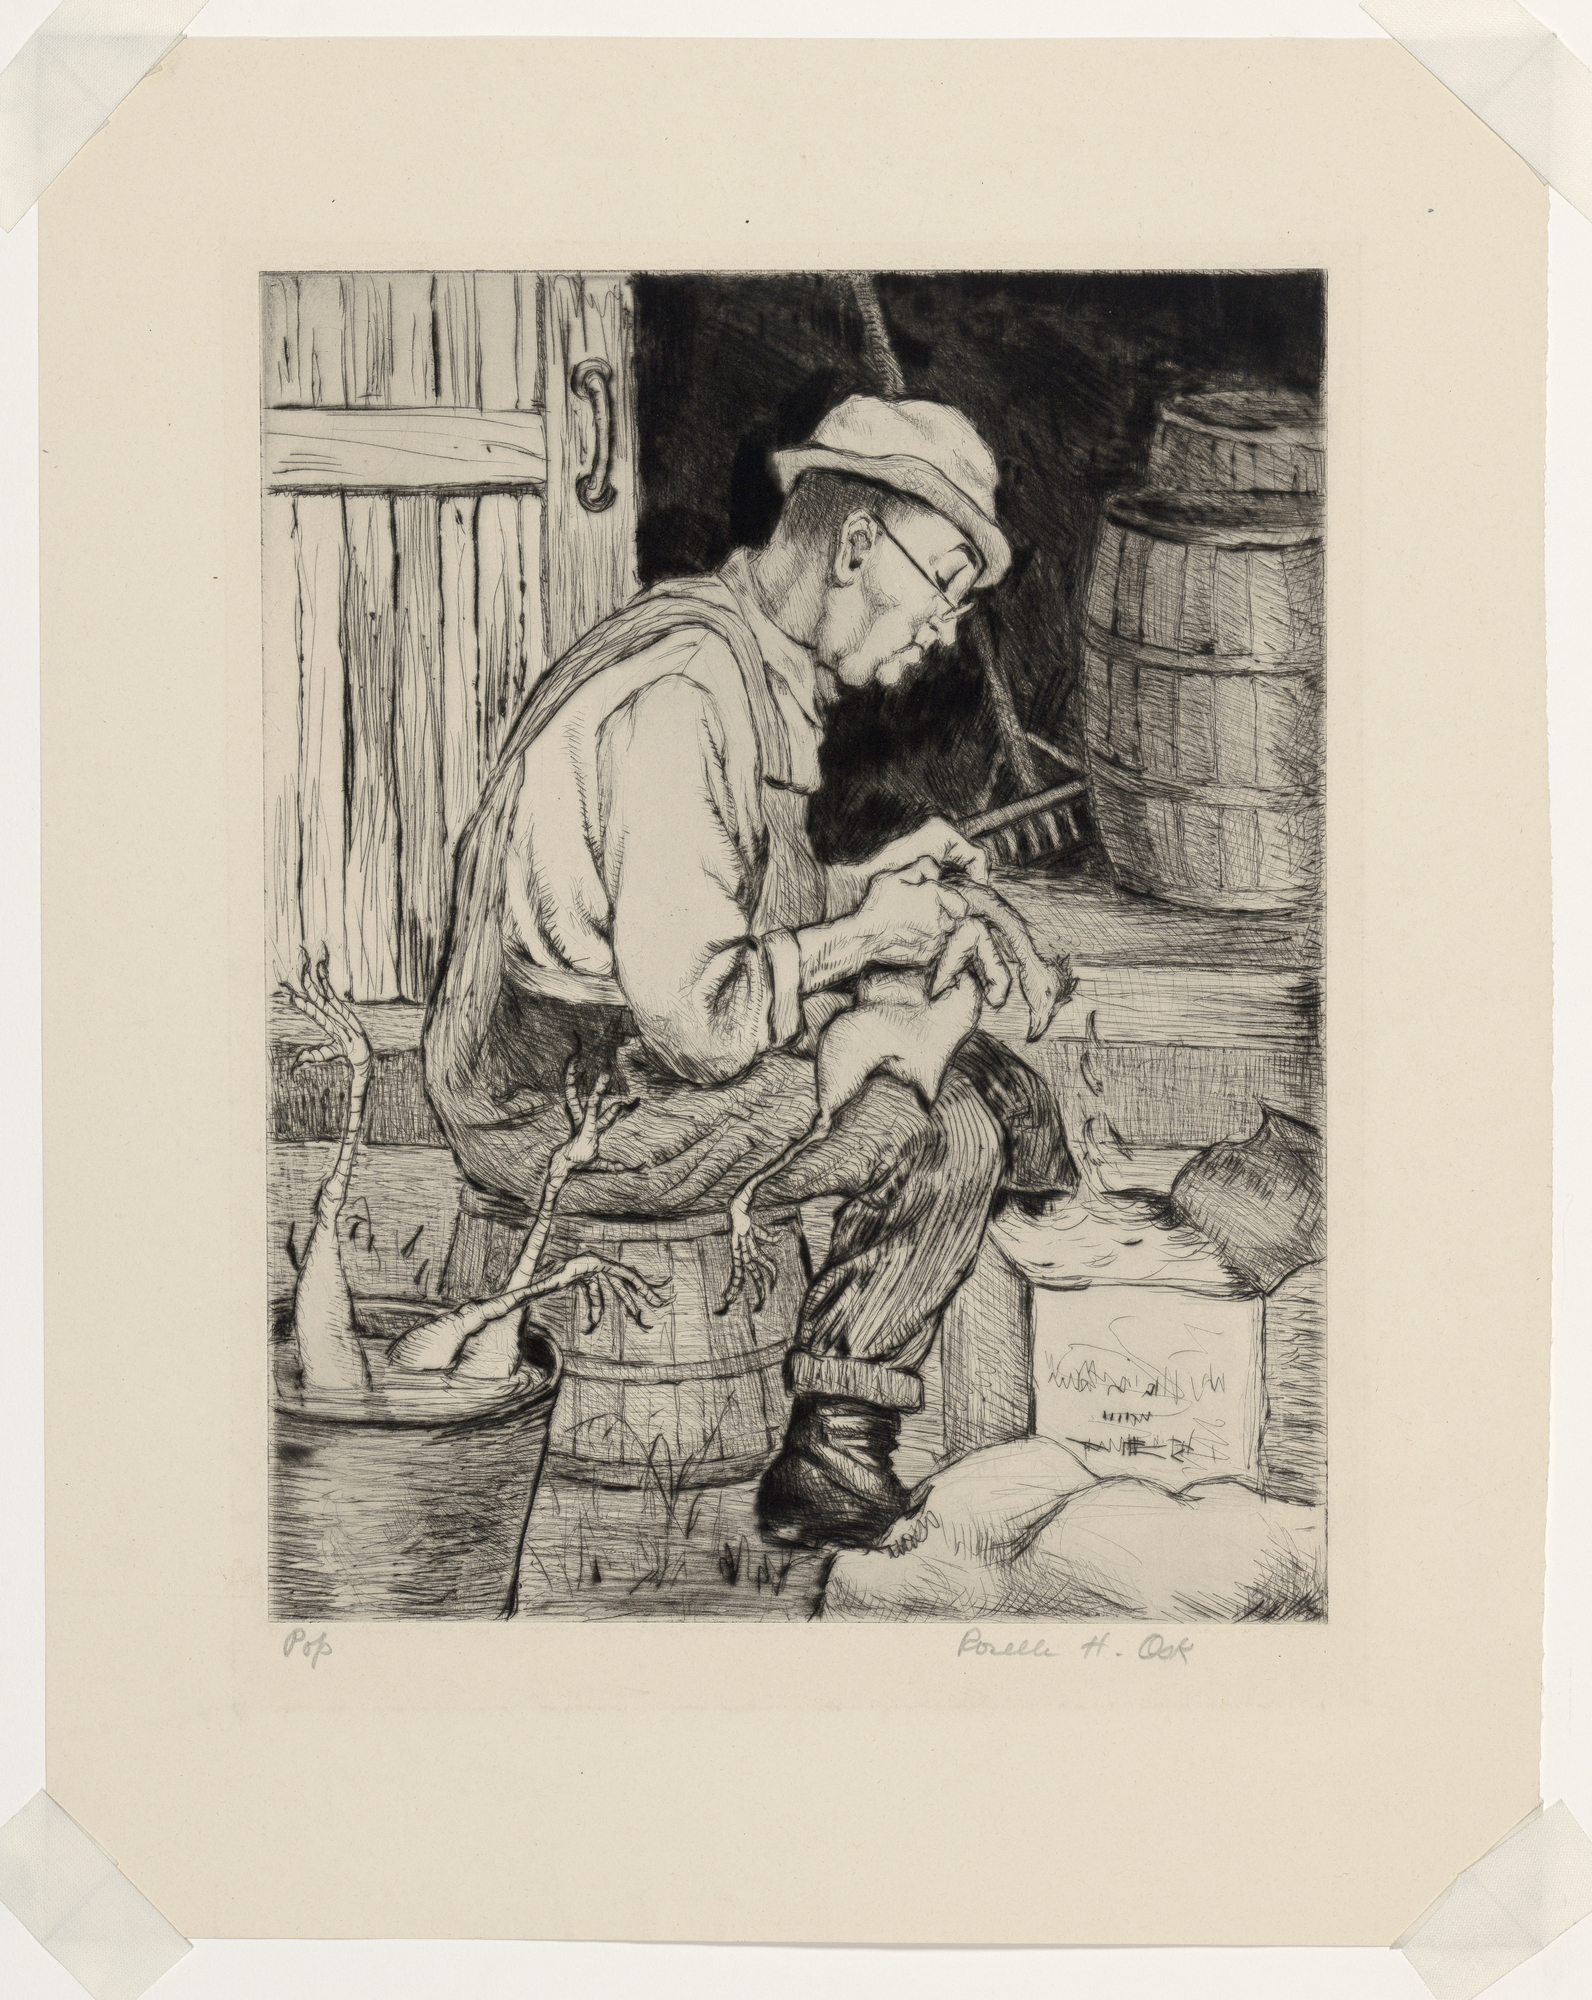 Older man wearing a hat, overalls, and glasses, seated on a barrel facing right, plucking a chicken